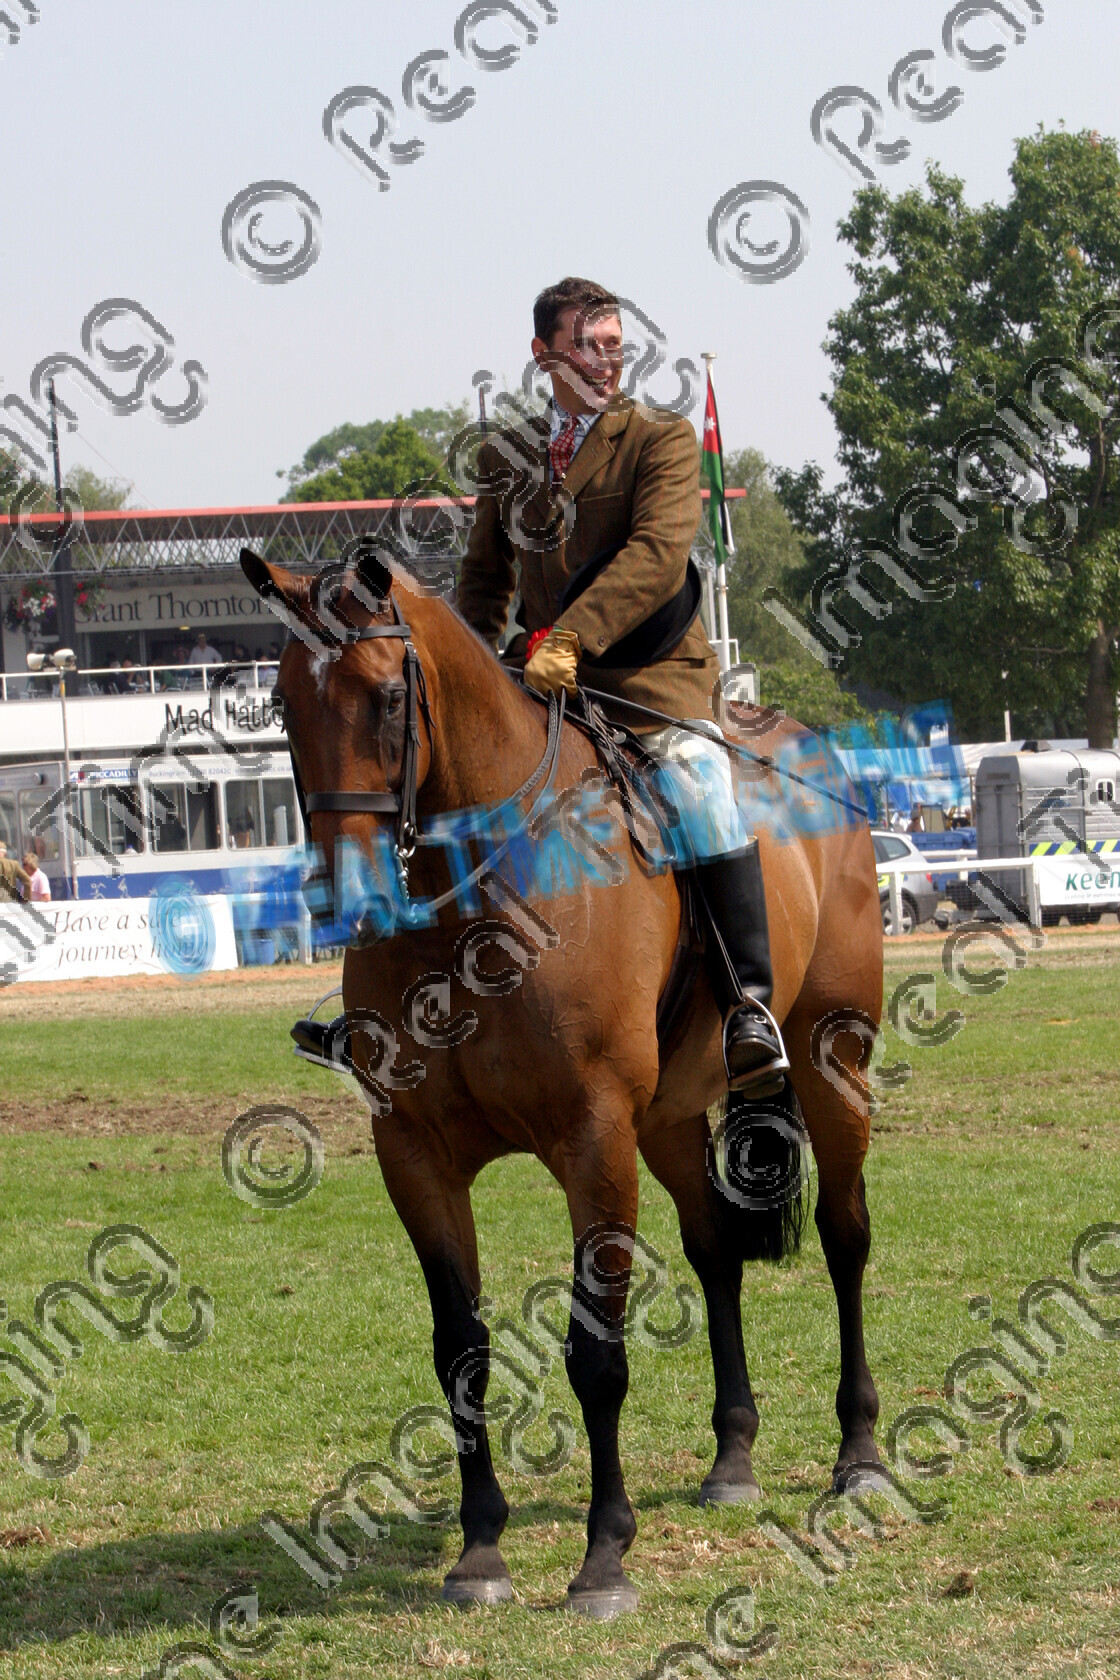 S06-32-M4-064 copy 
 Keywords: The Royal Show rosette rosettes prize winner horse pony show showing Tuesday 4 July 2006 standing stood presentation championship champion ridden mounted 76 Classic Gold II ridden by Robert Walker, Heather McLoy Middleweight Hunter bay gelding